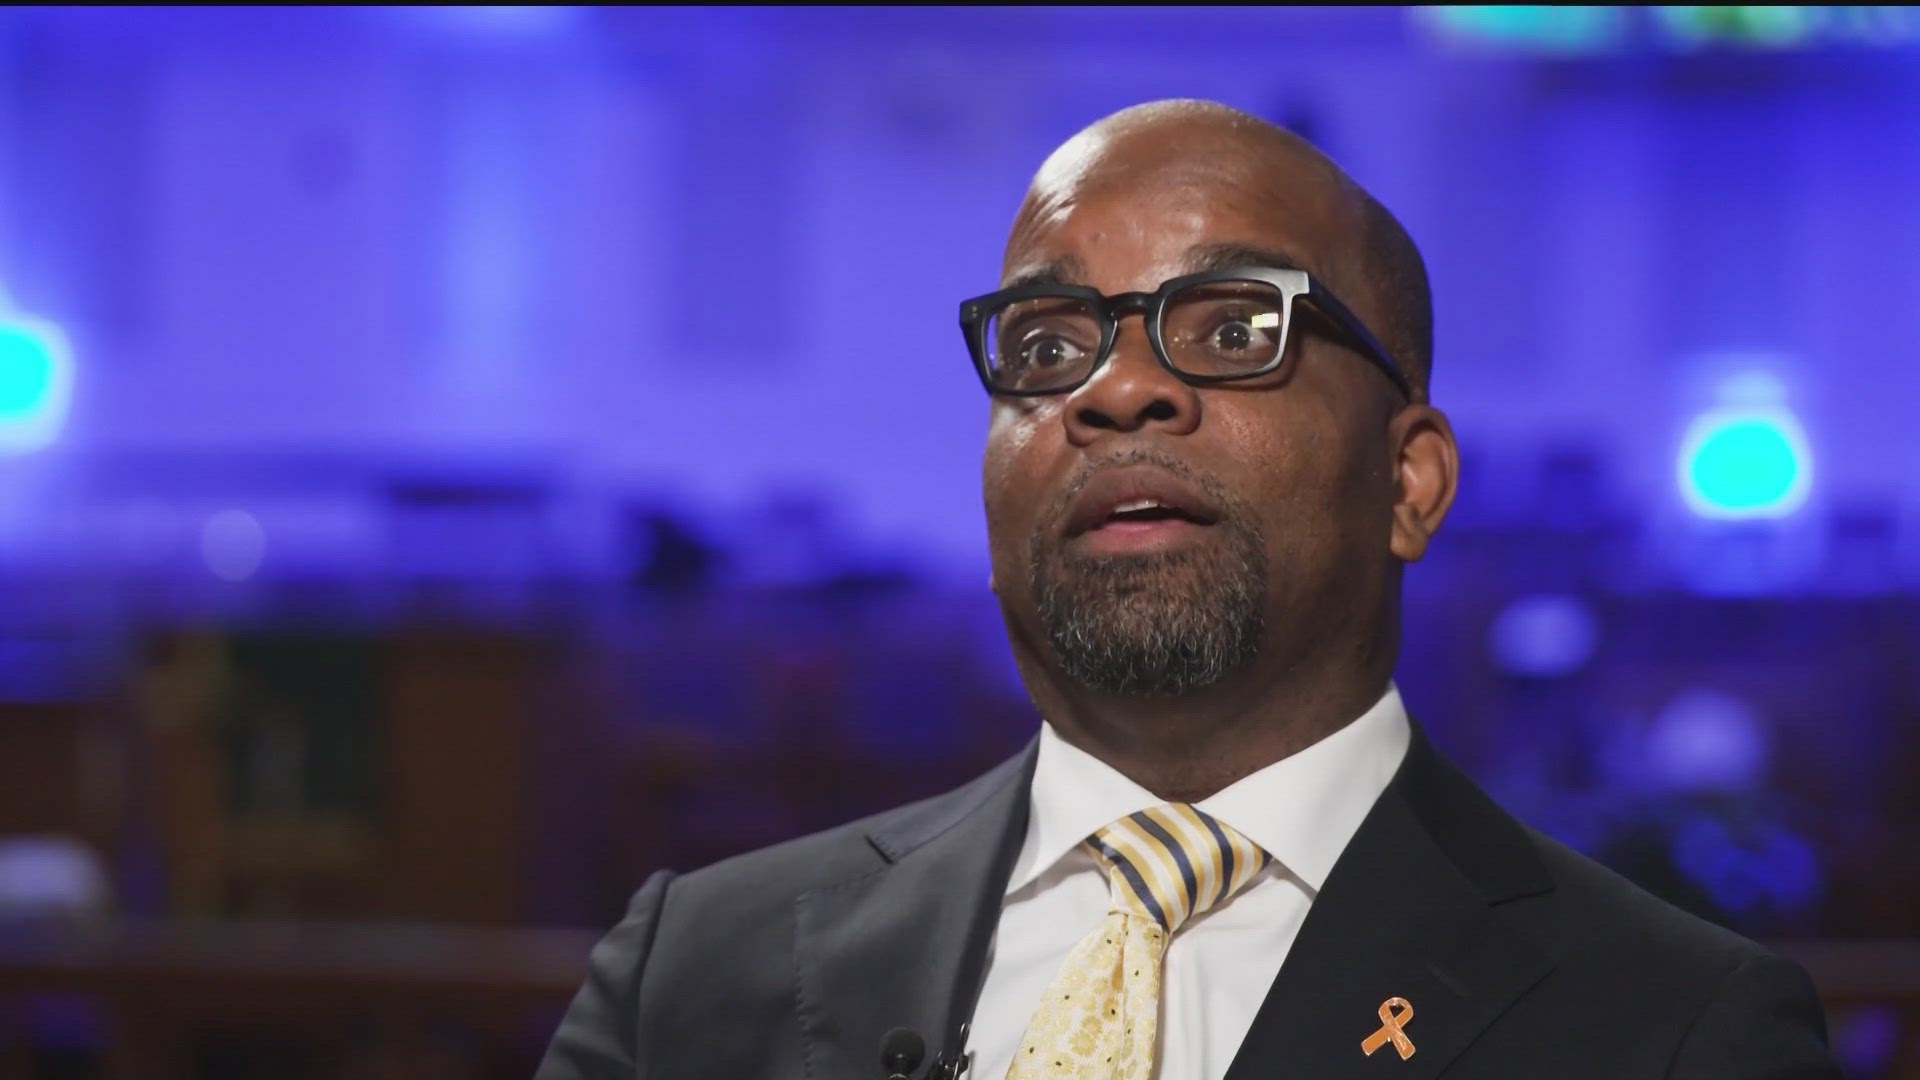 This week, we sat down with Anton Elwood, the sr. pastor at DeKalb County's Saint Phillip AME Church to talk about what life looks like ahead of the Nov. election